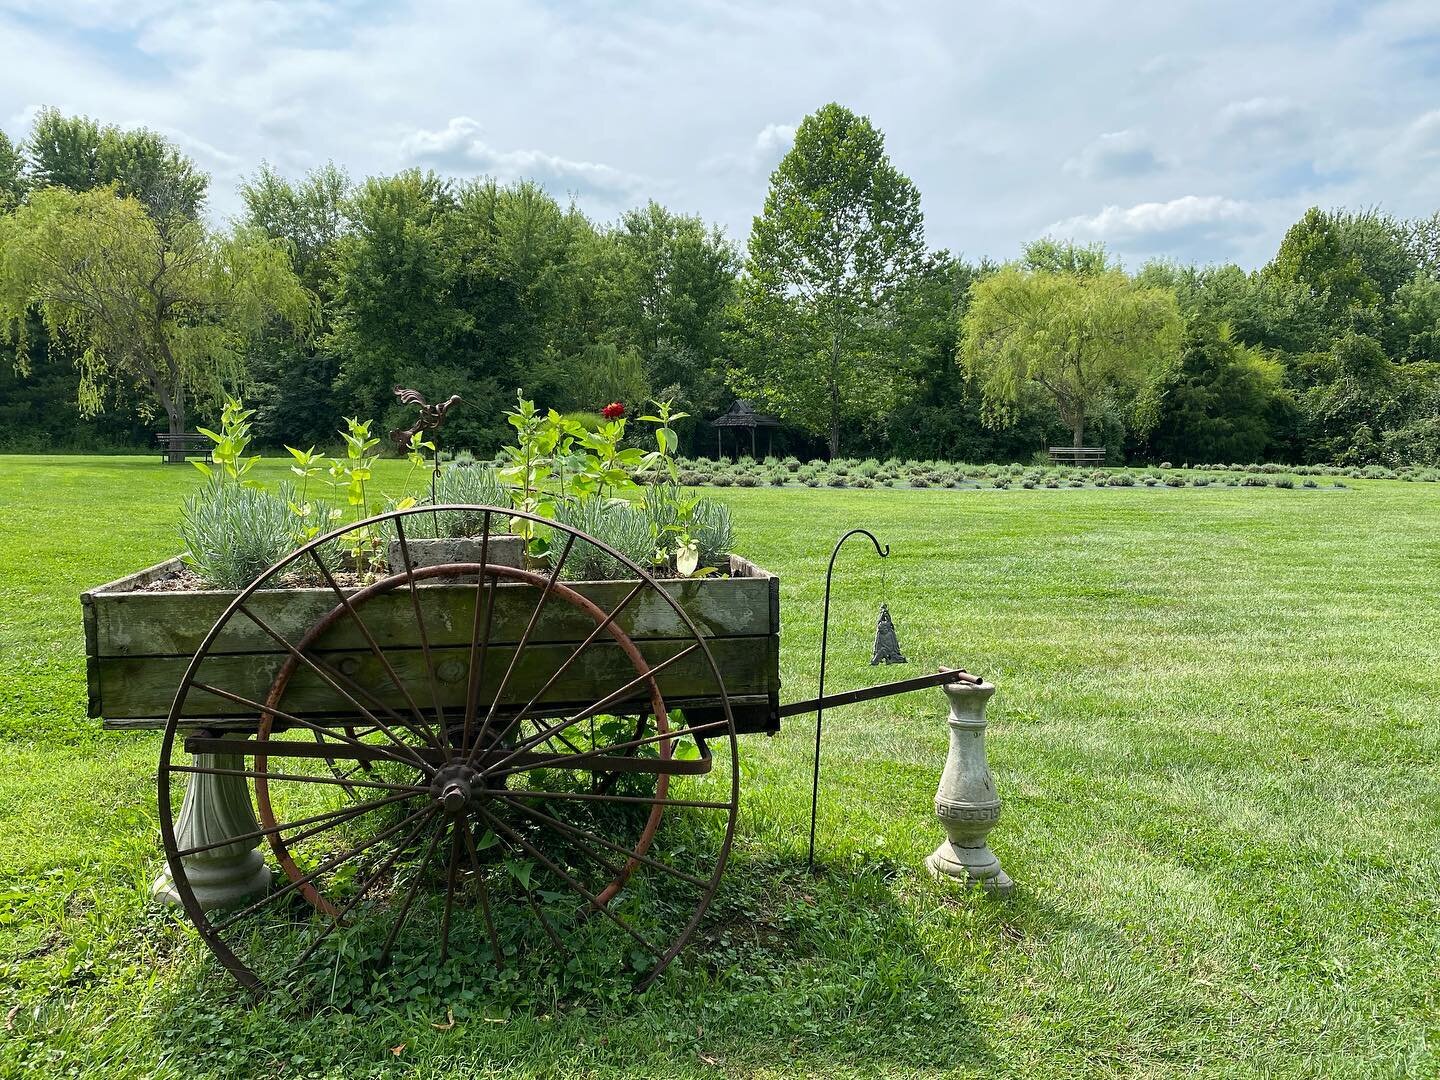 Happy Labor Day weekend! Visit us and get in some relaxation time. 💜
.
.
#willowfieldlavenderfarm #lavender #visitindy #visitmorgancounty #lavenderfarm #vintage